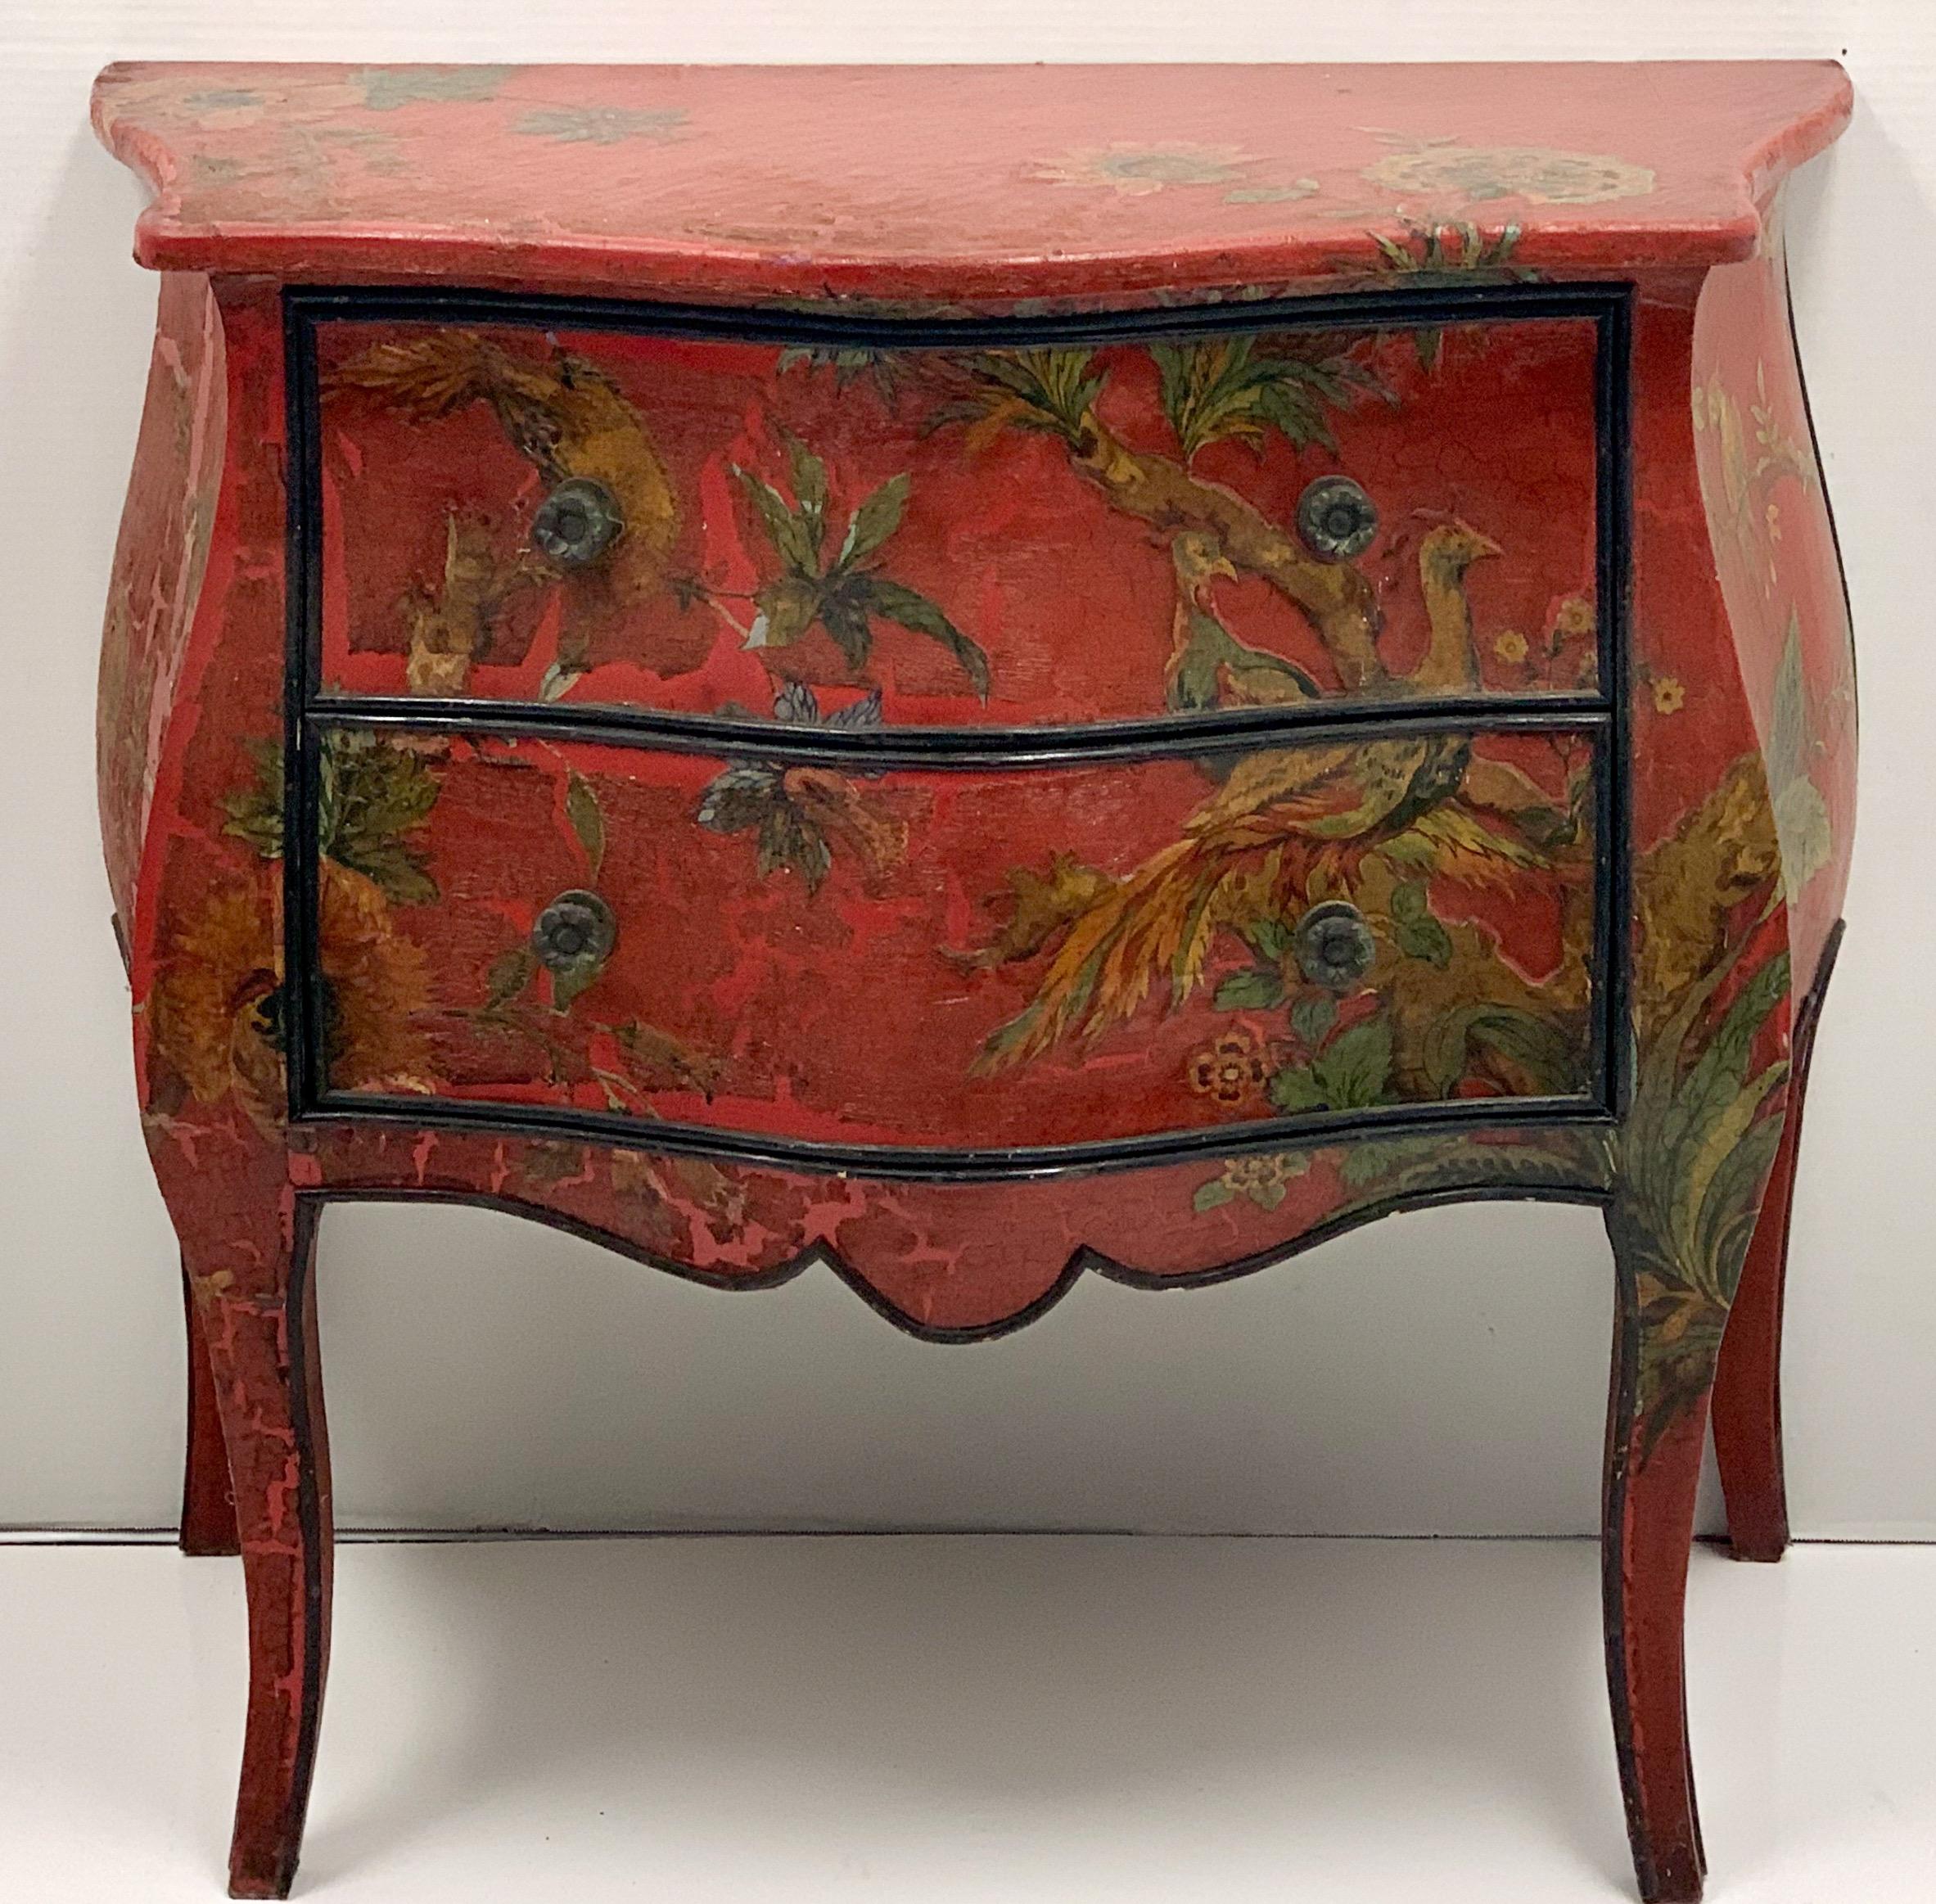 This is an antique French red chinoiserie bombe chest with early decoupage applied throughout the body. The piece has Louis XVI styling, and does show some age appropriate wear.